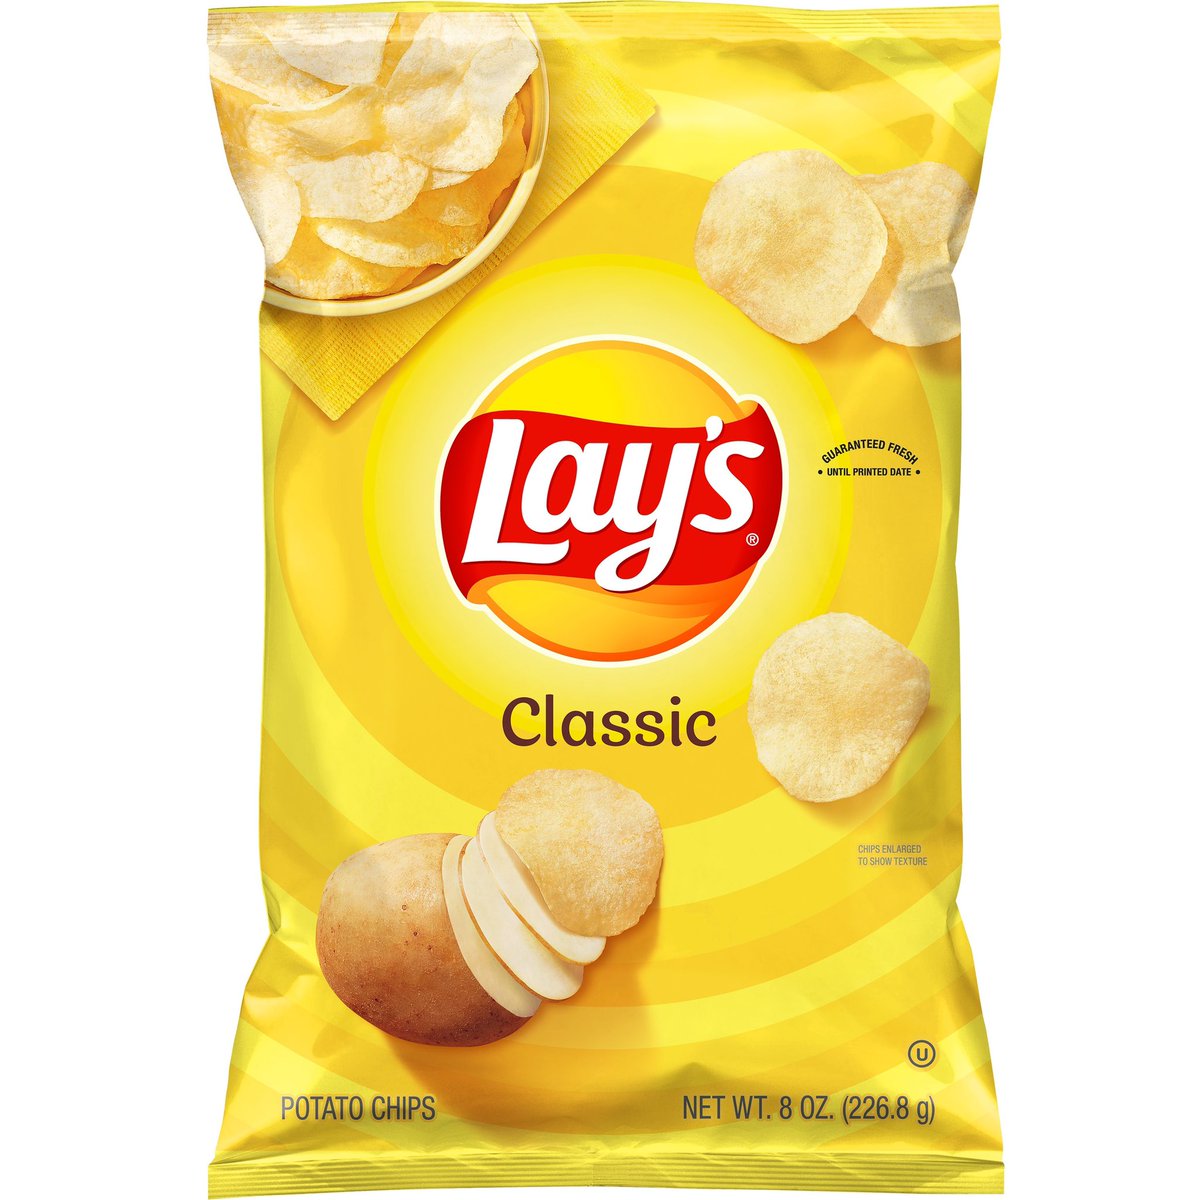 Thread on Adam Driver as different chips. cw // food